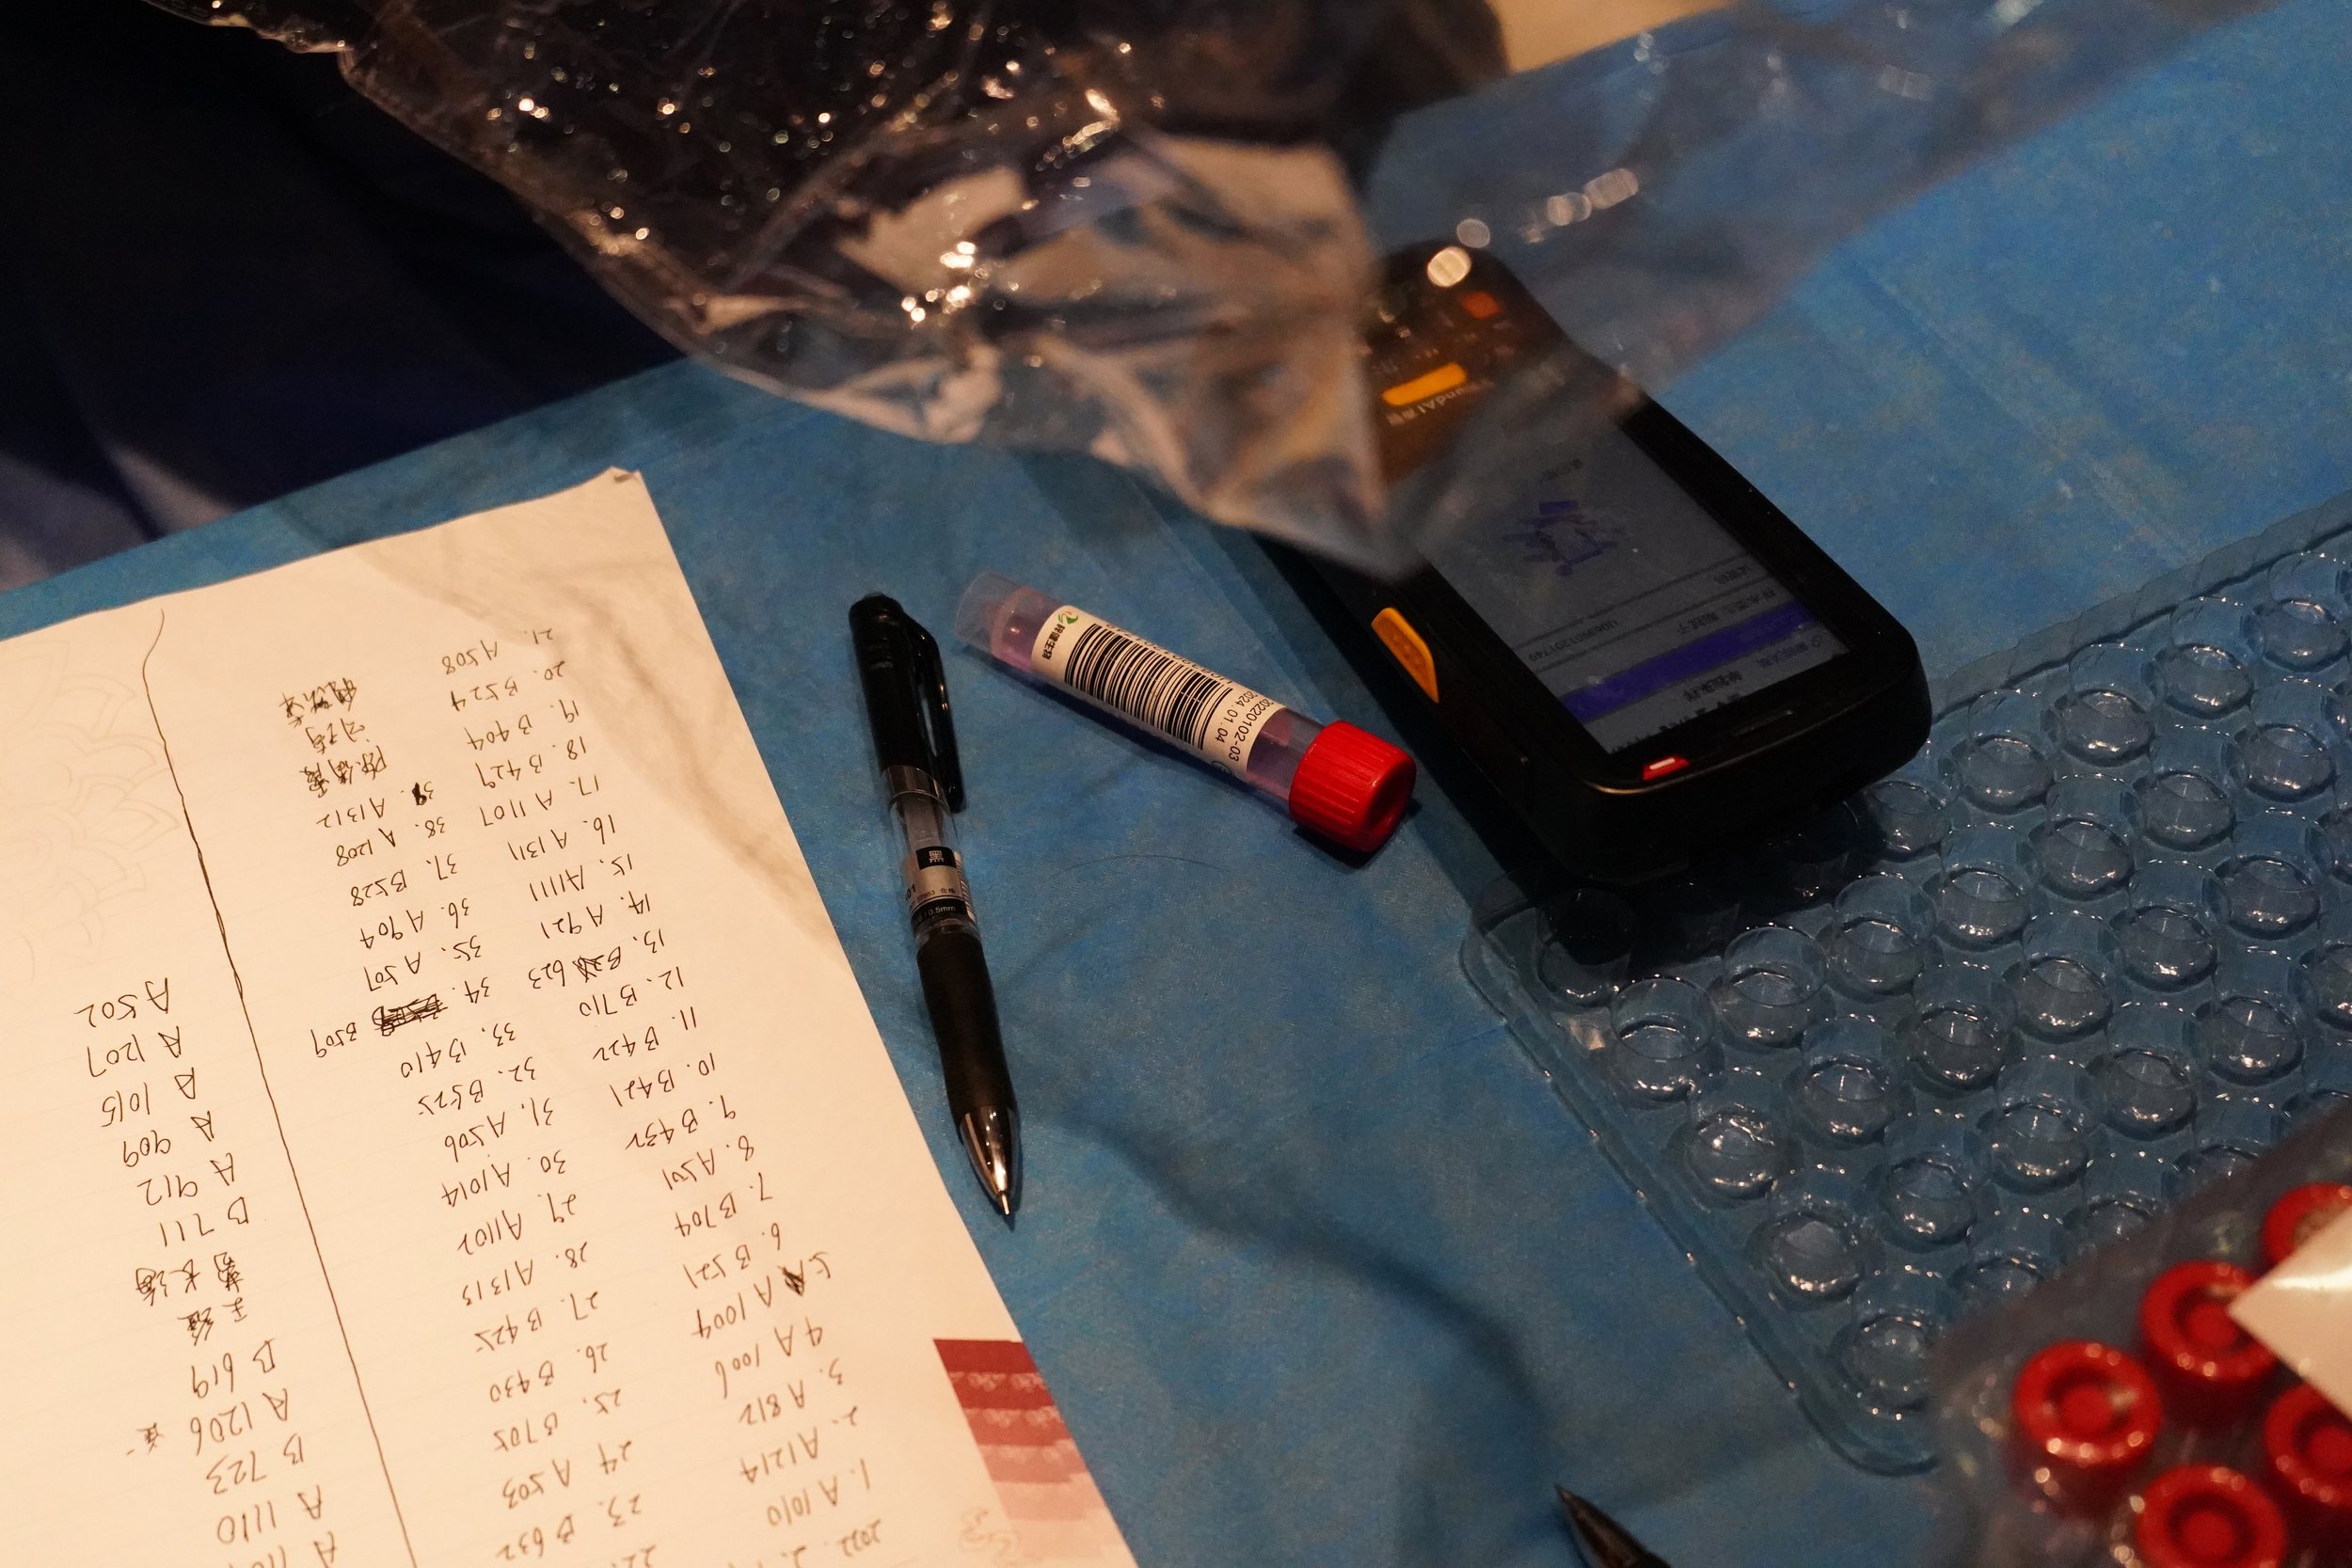  A medical worker prepares a testing kit for Associated Press photographer Matt Slocum after testing positive that morning at a hotel during the 2022 Winter Olympics, Feb. 9, 2022, in Beijing. (AP Photo/Matt Slocum) 